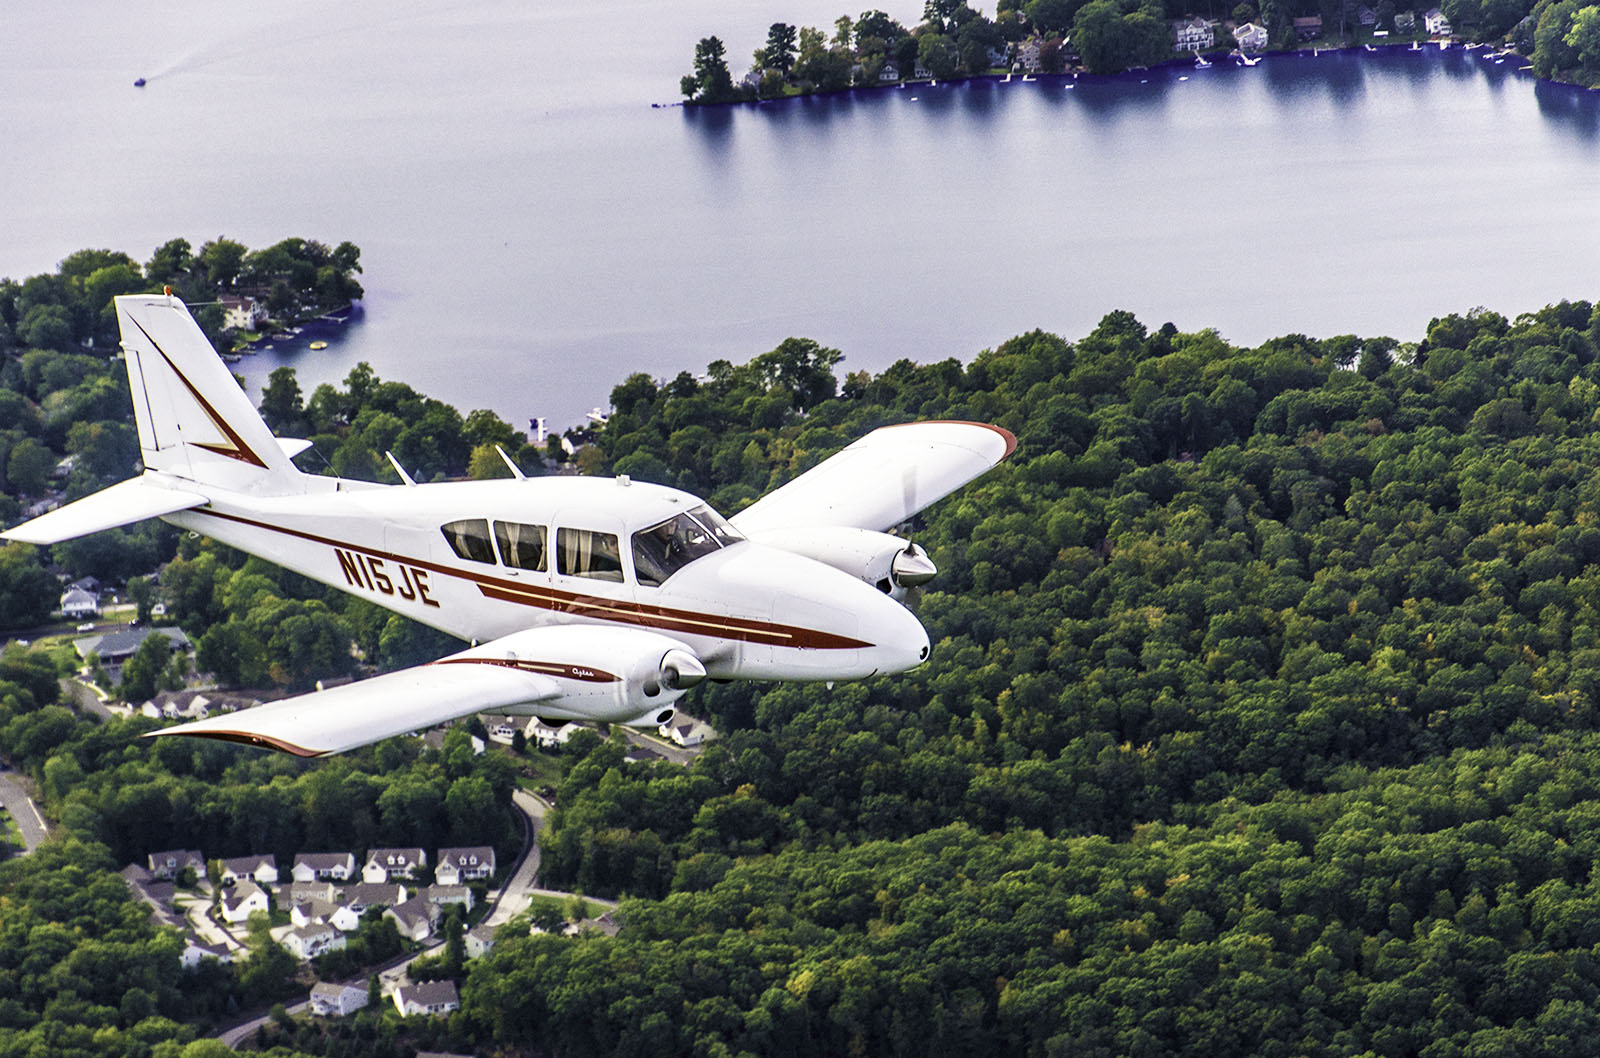 Professional Programs Available For Those Seeking A Career As A Pilot